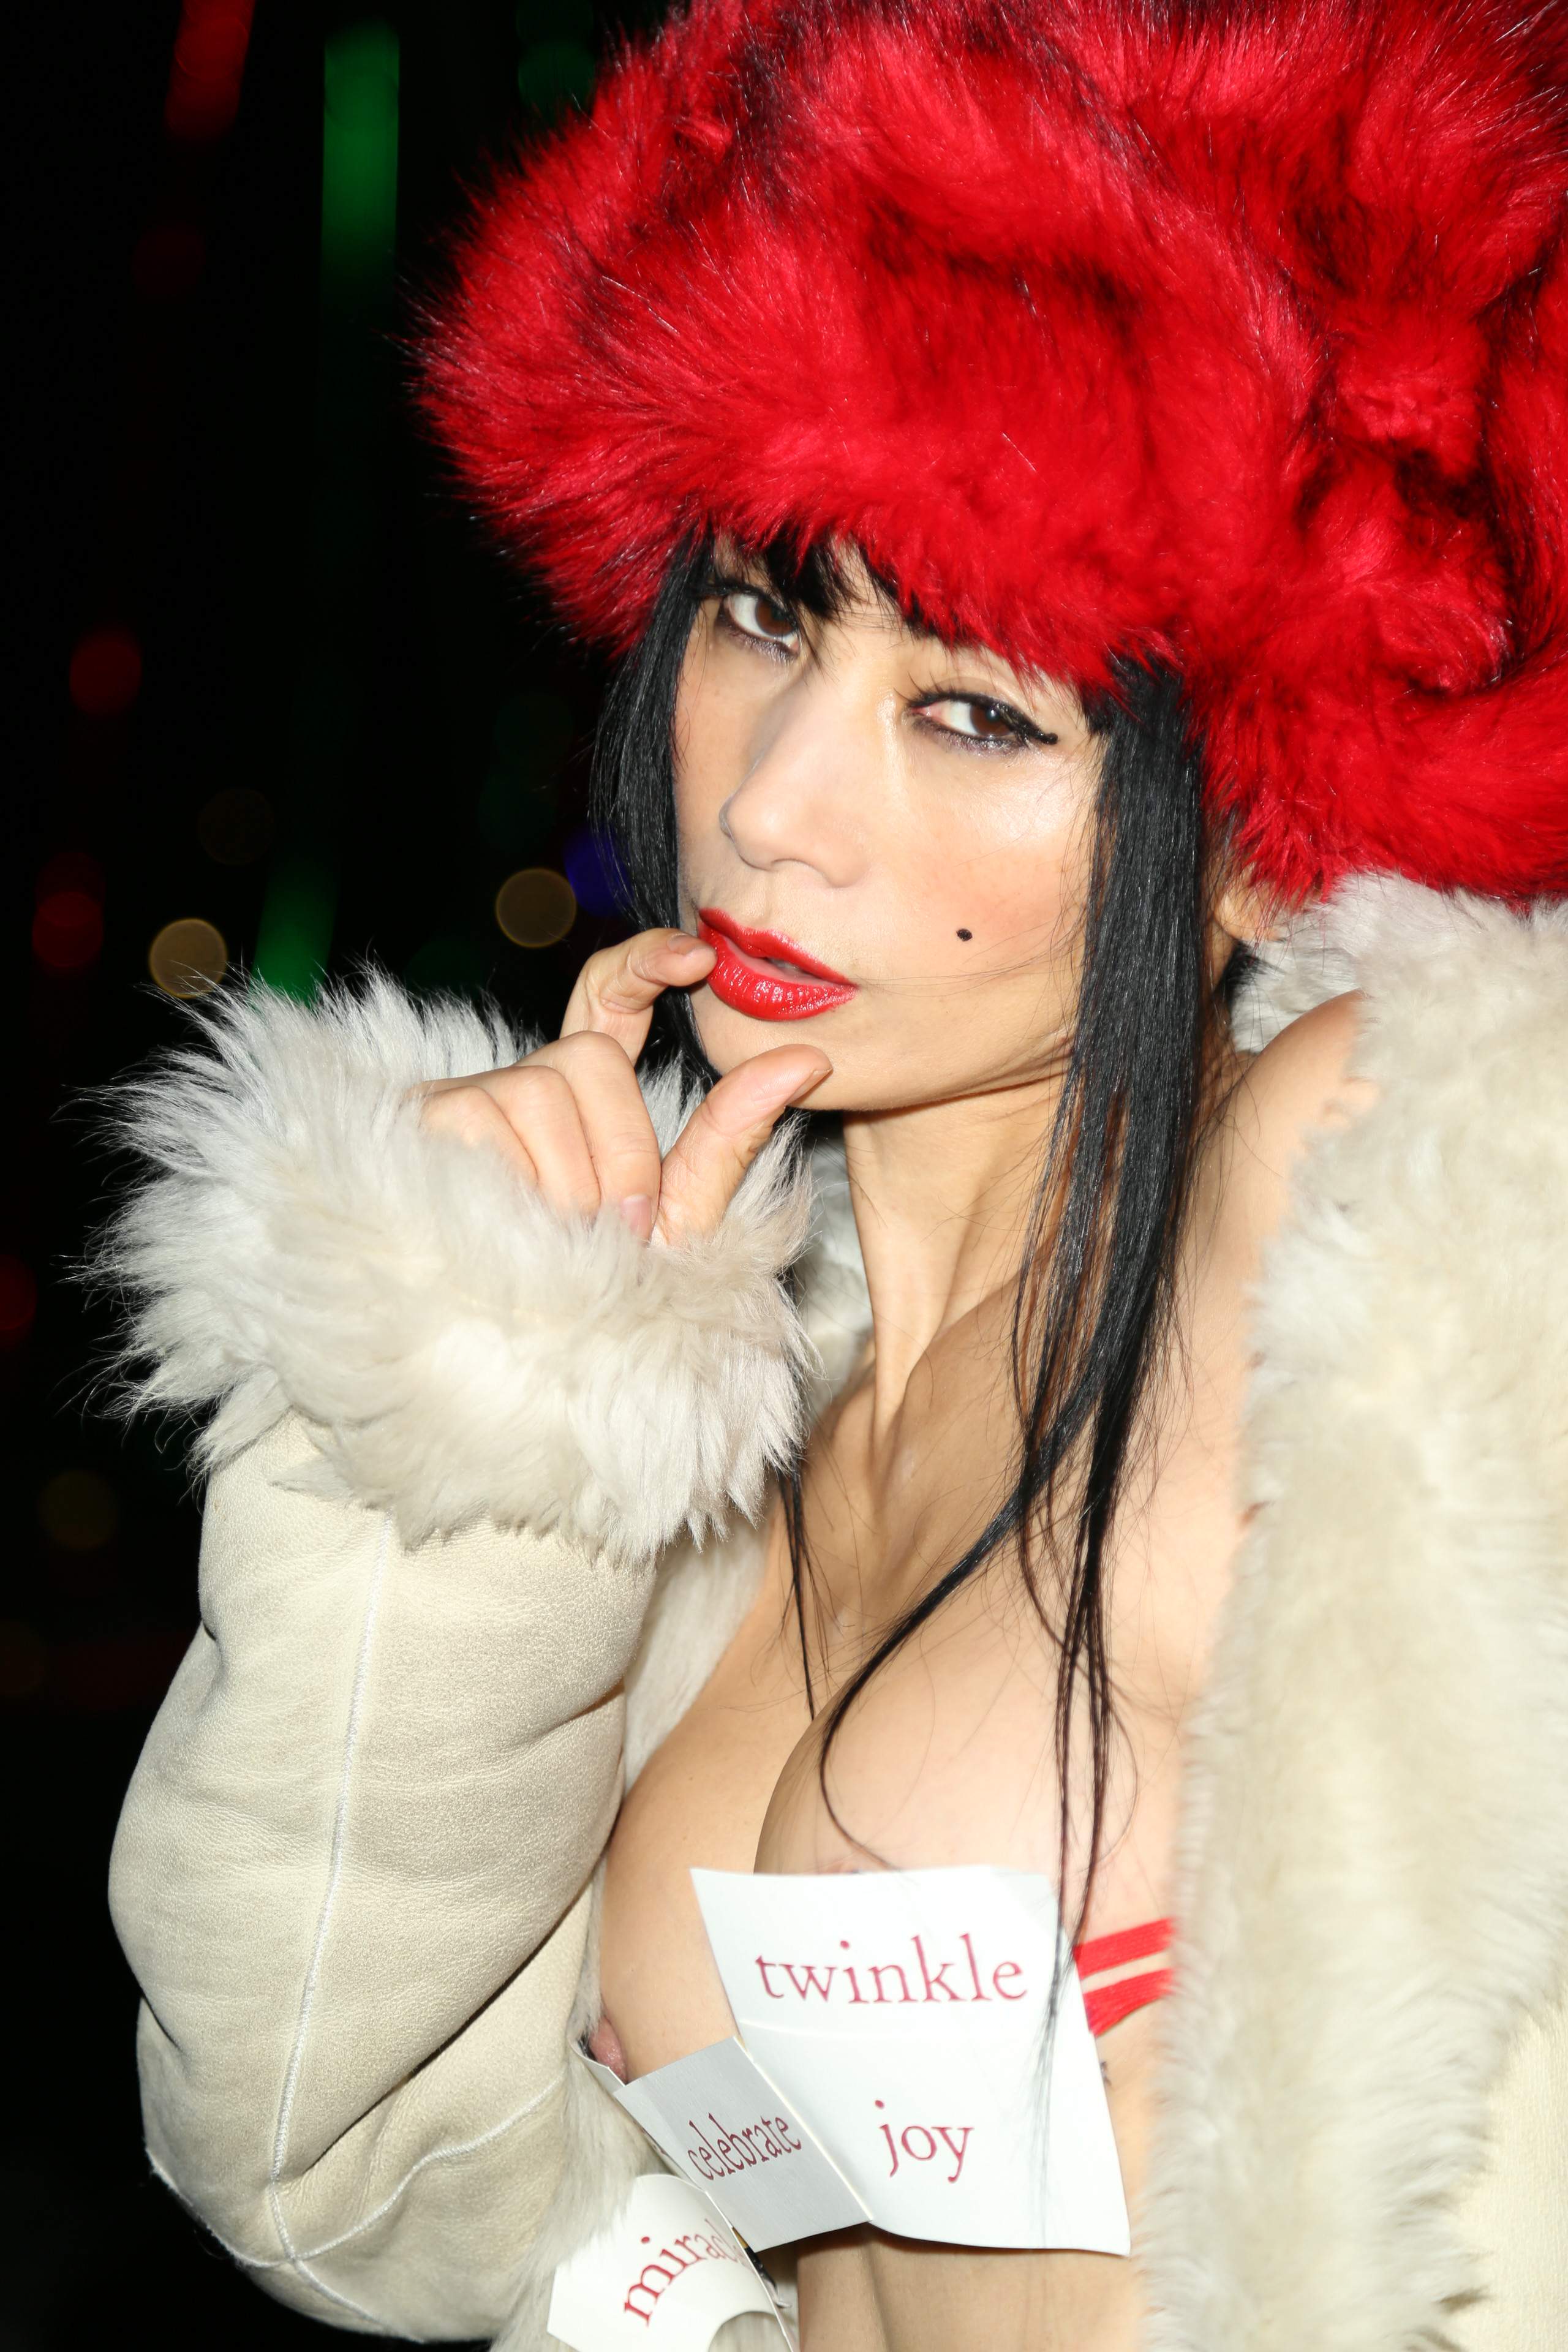 bai-ling-nipple-slip-while-heading-to-a-party-in-los-angeles-07.jpg